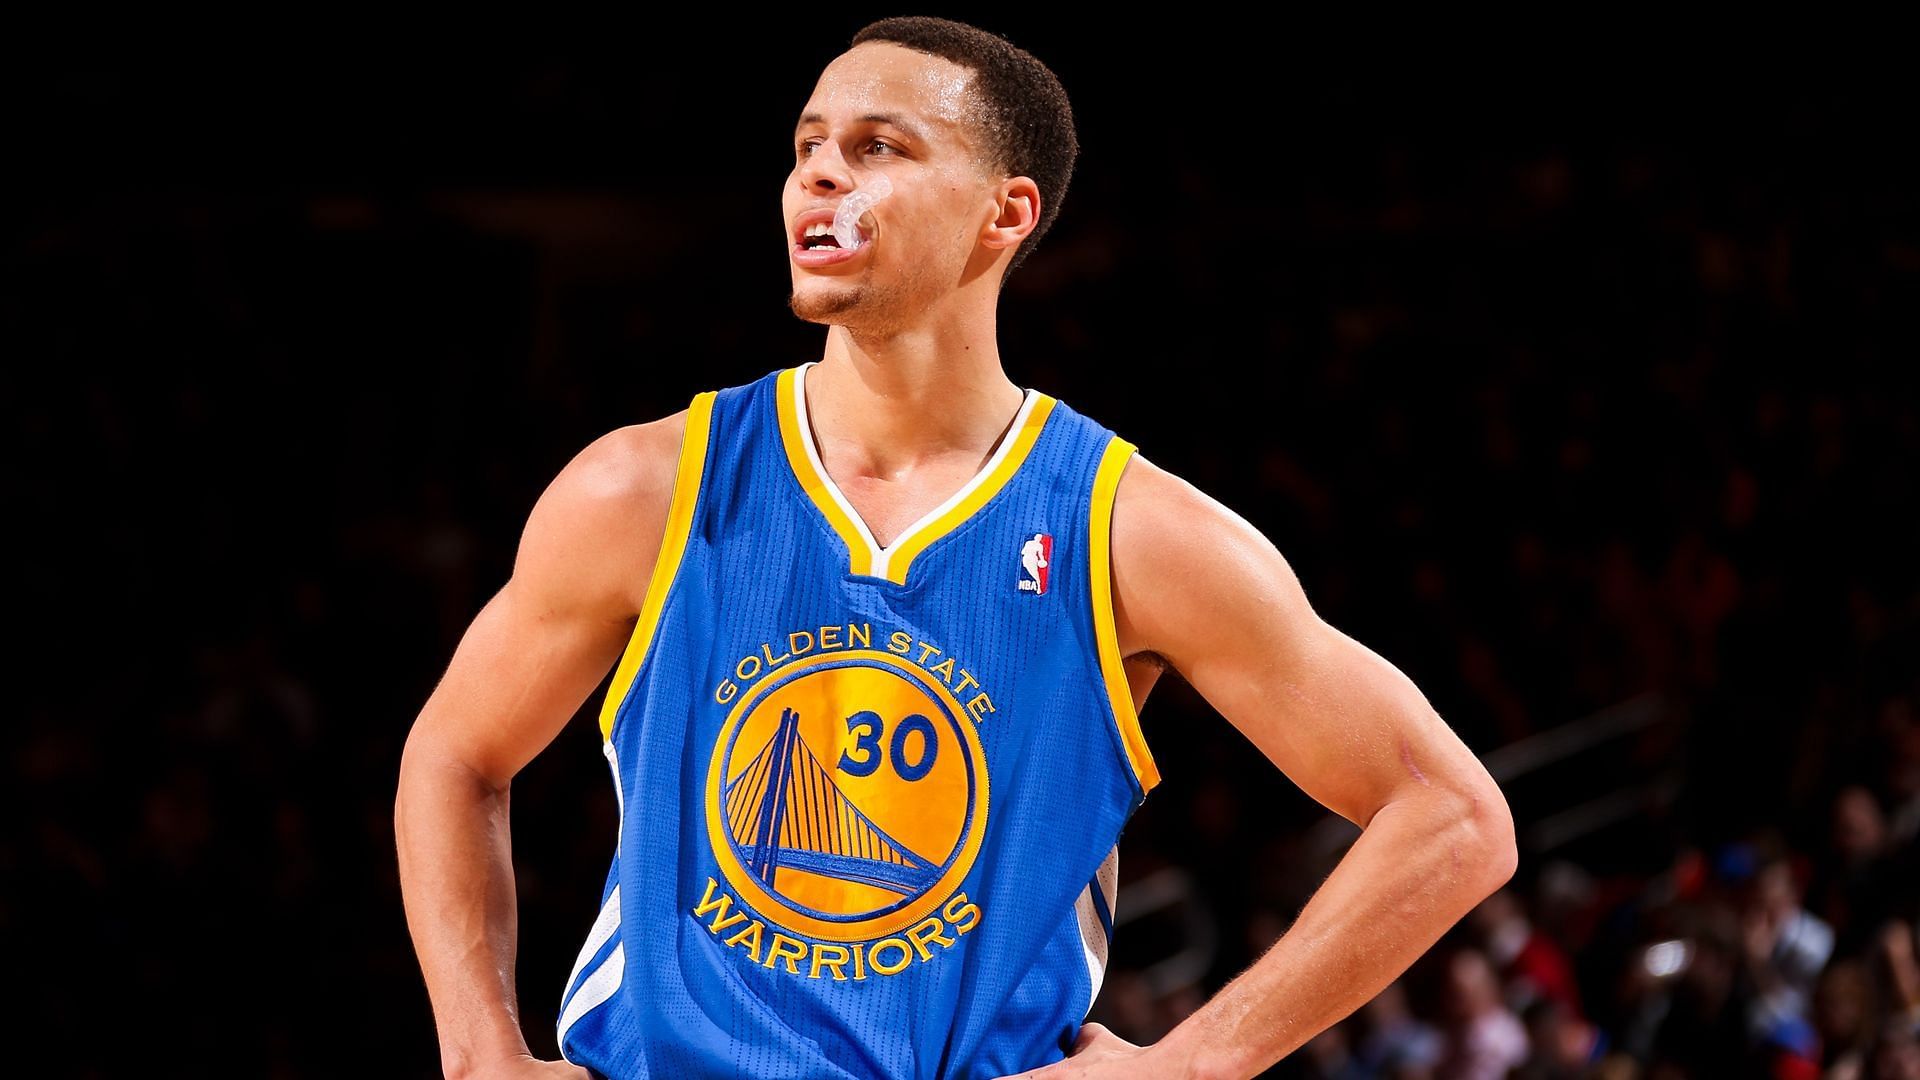 Golden State Warriors guard Stephen Curry put on a show at the Garden